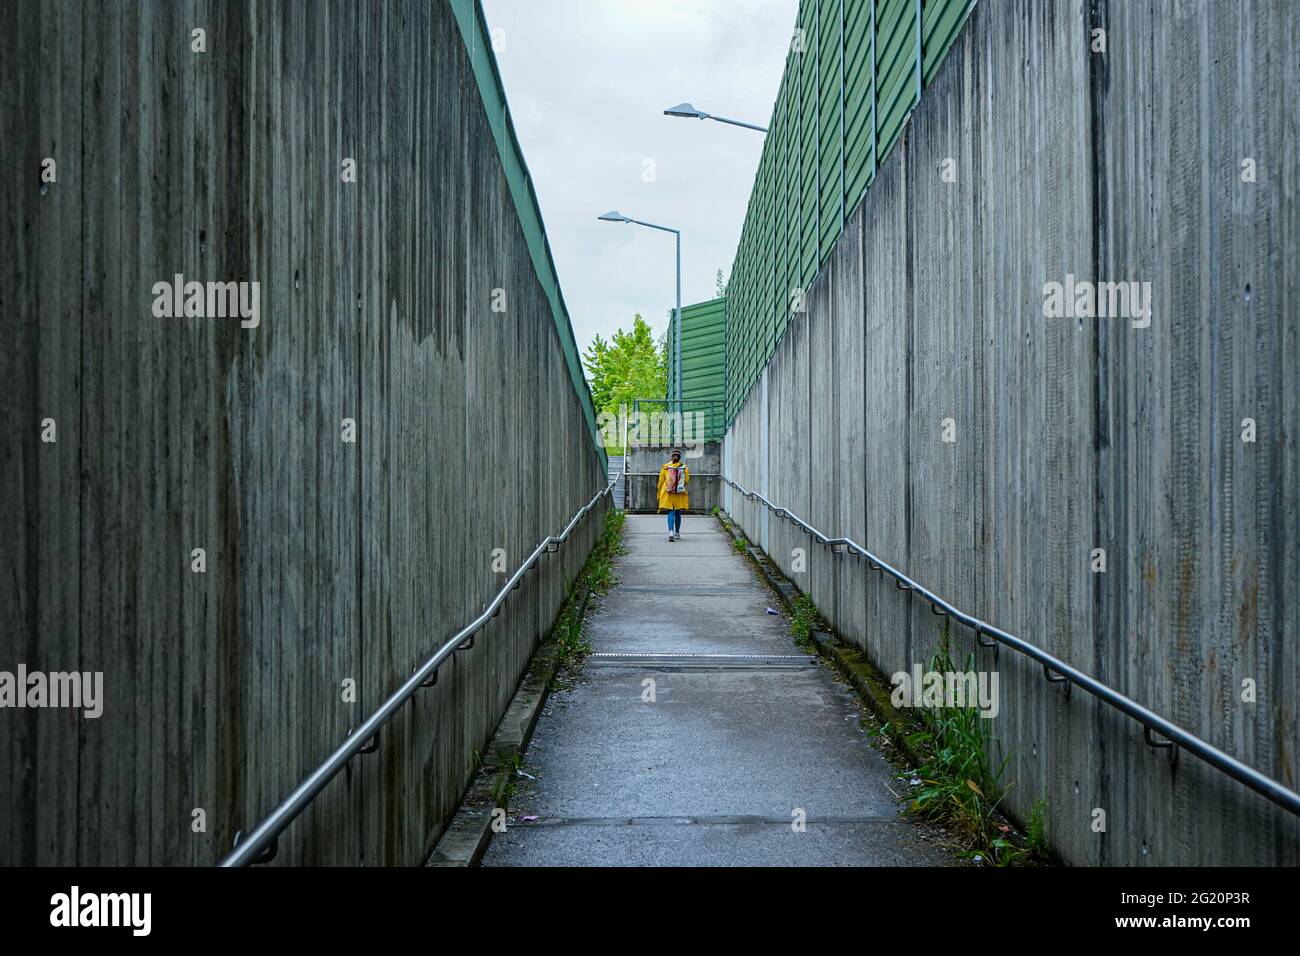 A woman in a yellow rain jacket walks from the S-Bahn in Petershausen, Bavaria, through a narrow footpath with high stone walls to the street. Stock Photo